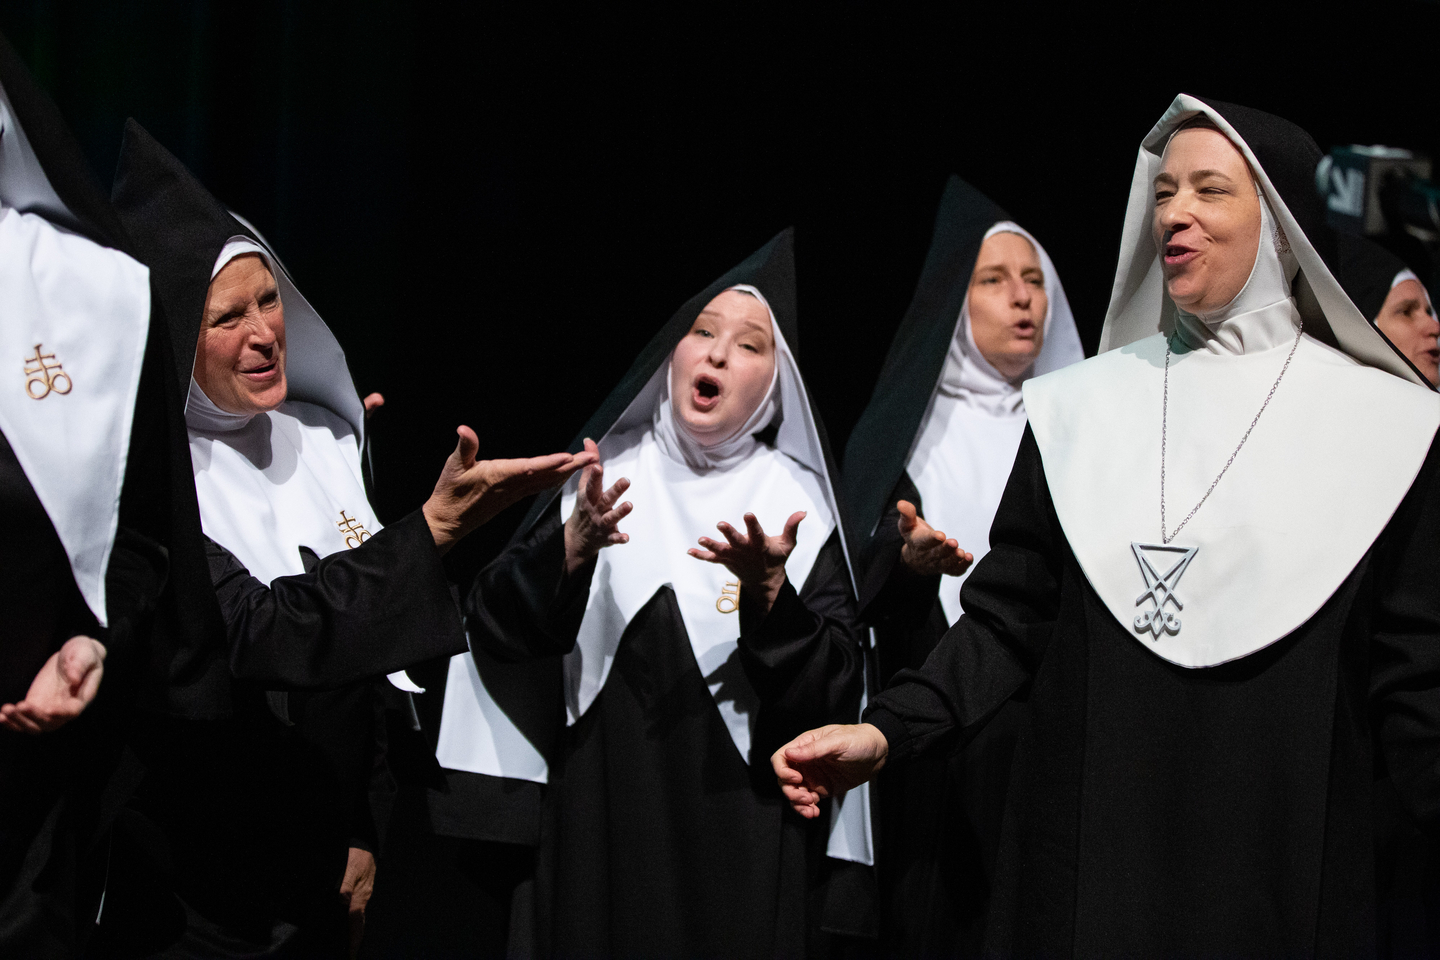 Good Omens Chattering Nuns at Neil Gaiman's Featured Session – Photo by Alexa Gonzalez Wagner